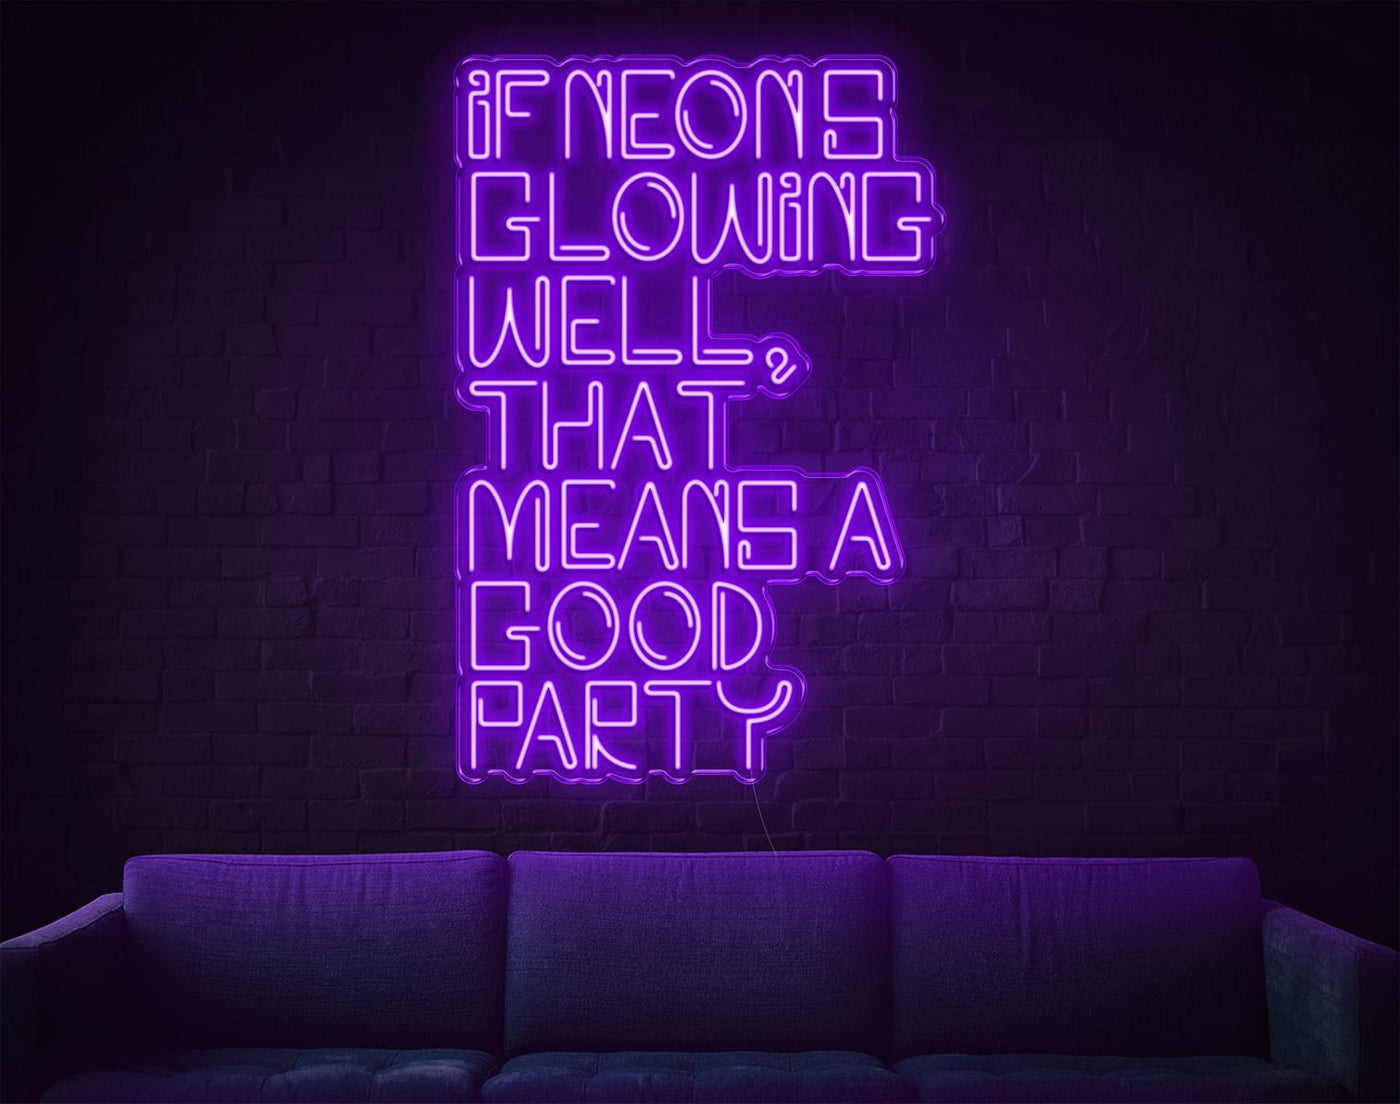 If Neons Glowing Well That Means A Good Party LED Neon Sign - 41inch x 28inchPurple